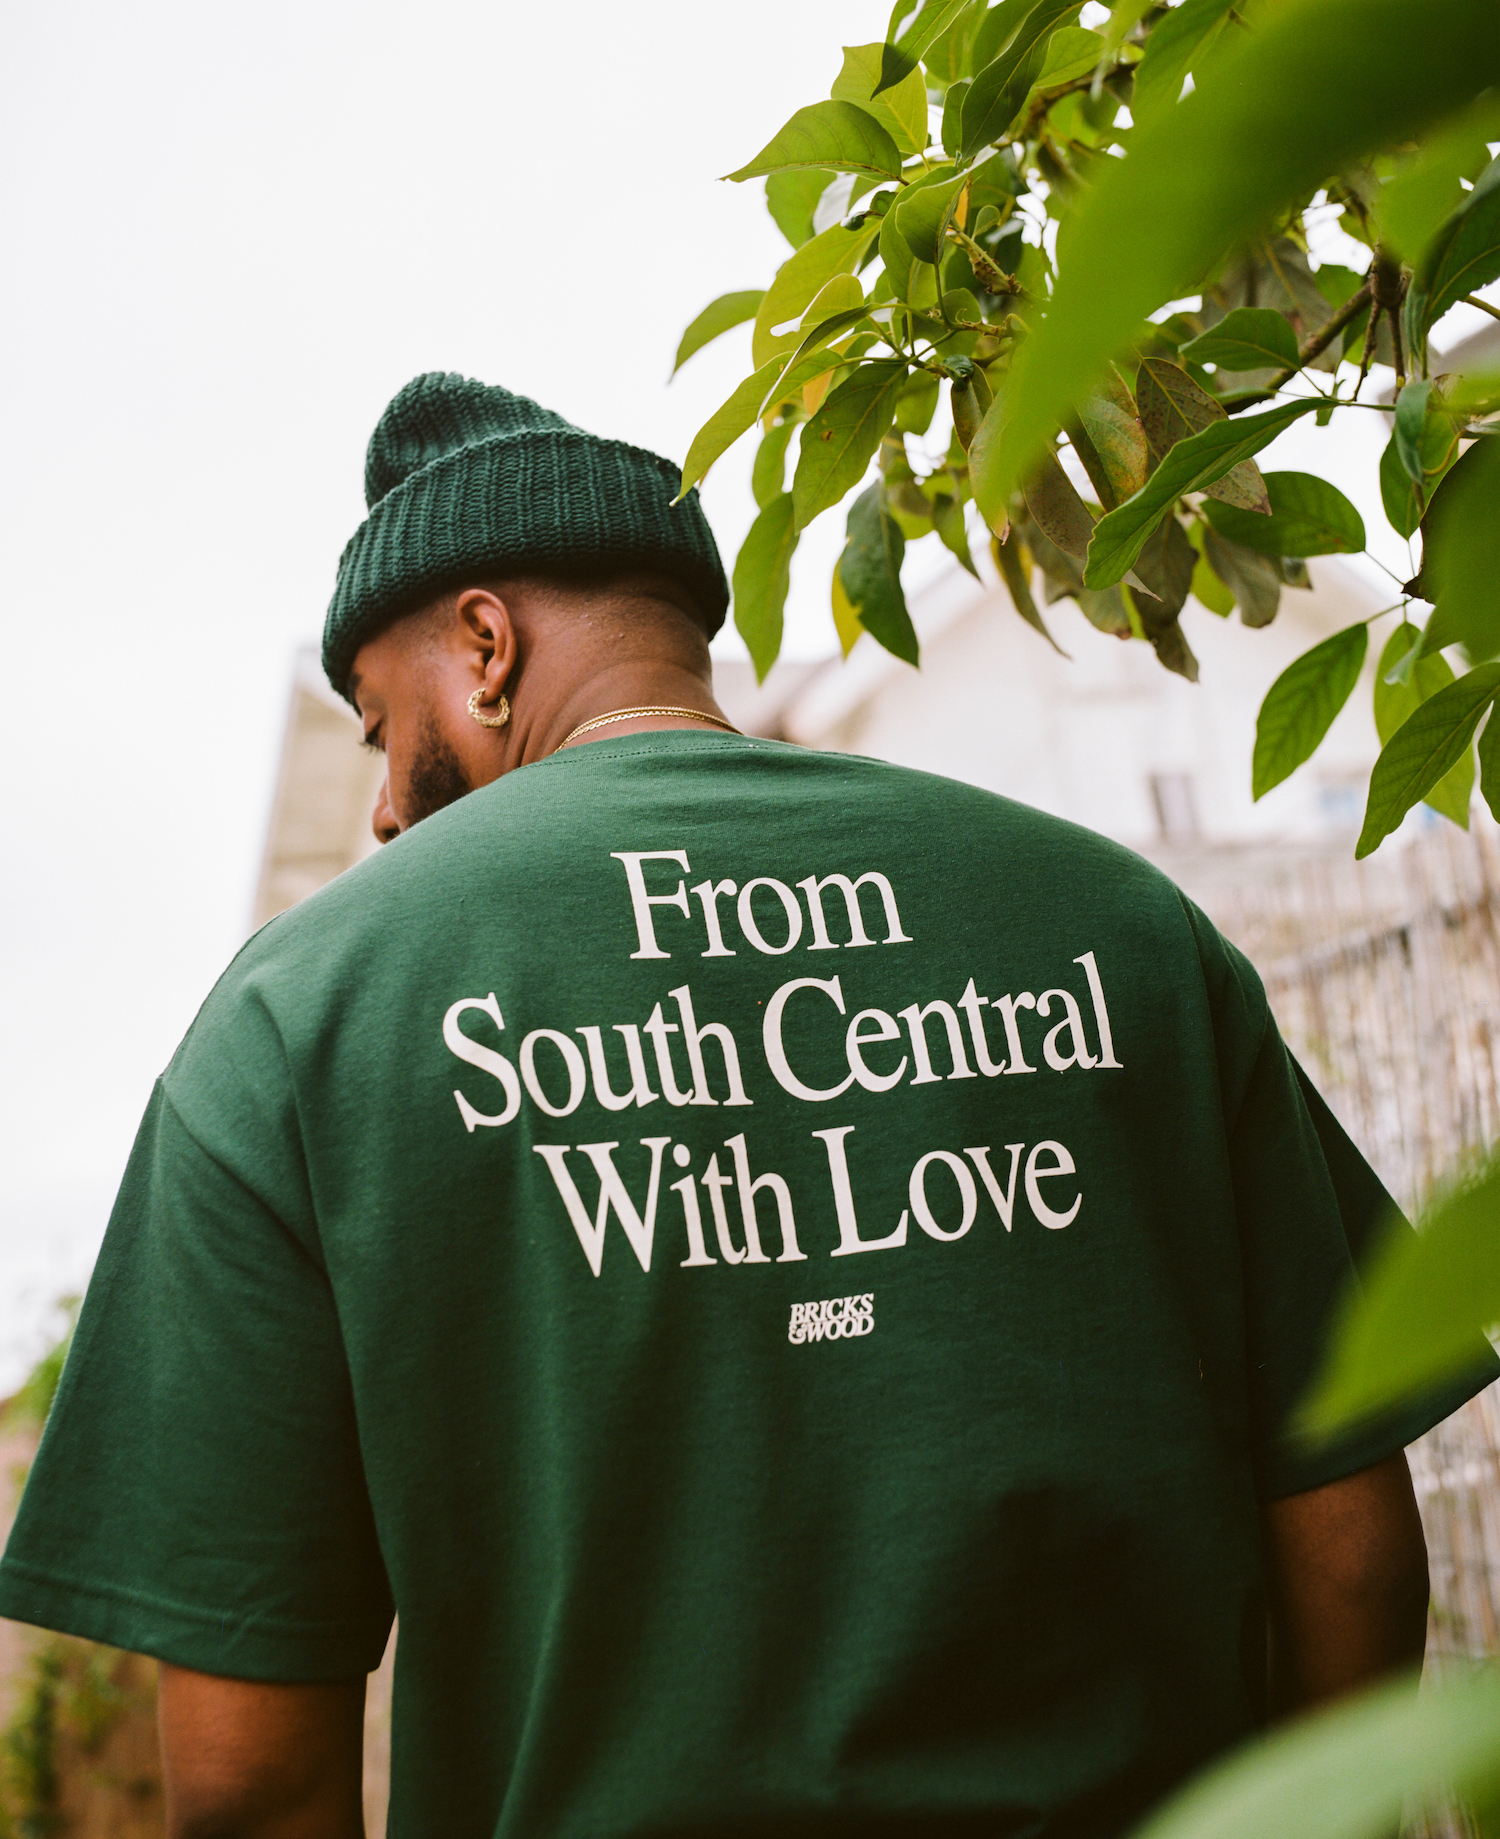 From south central with love